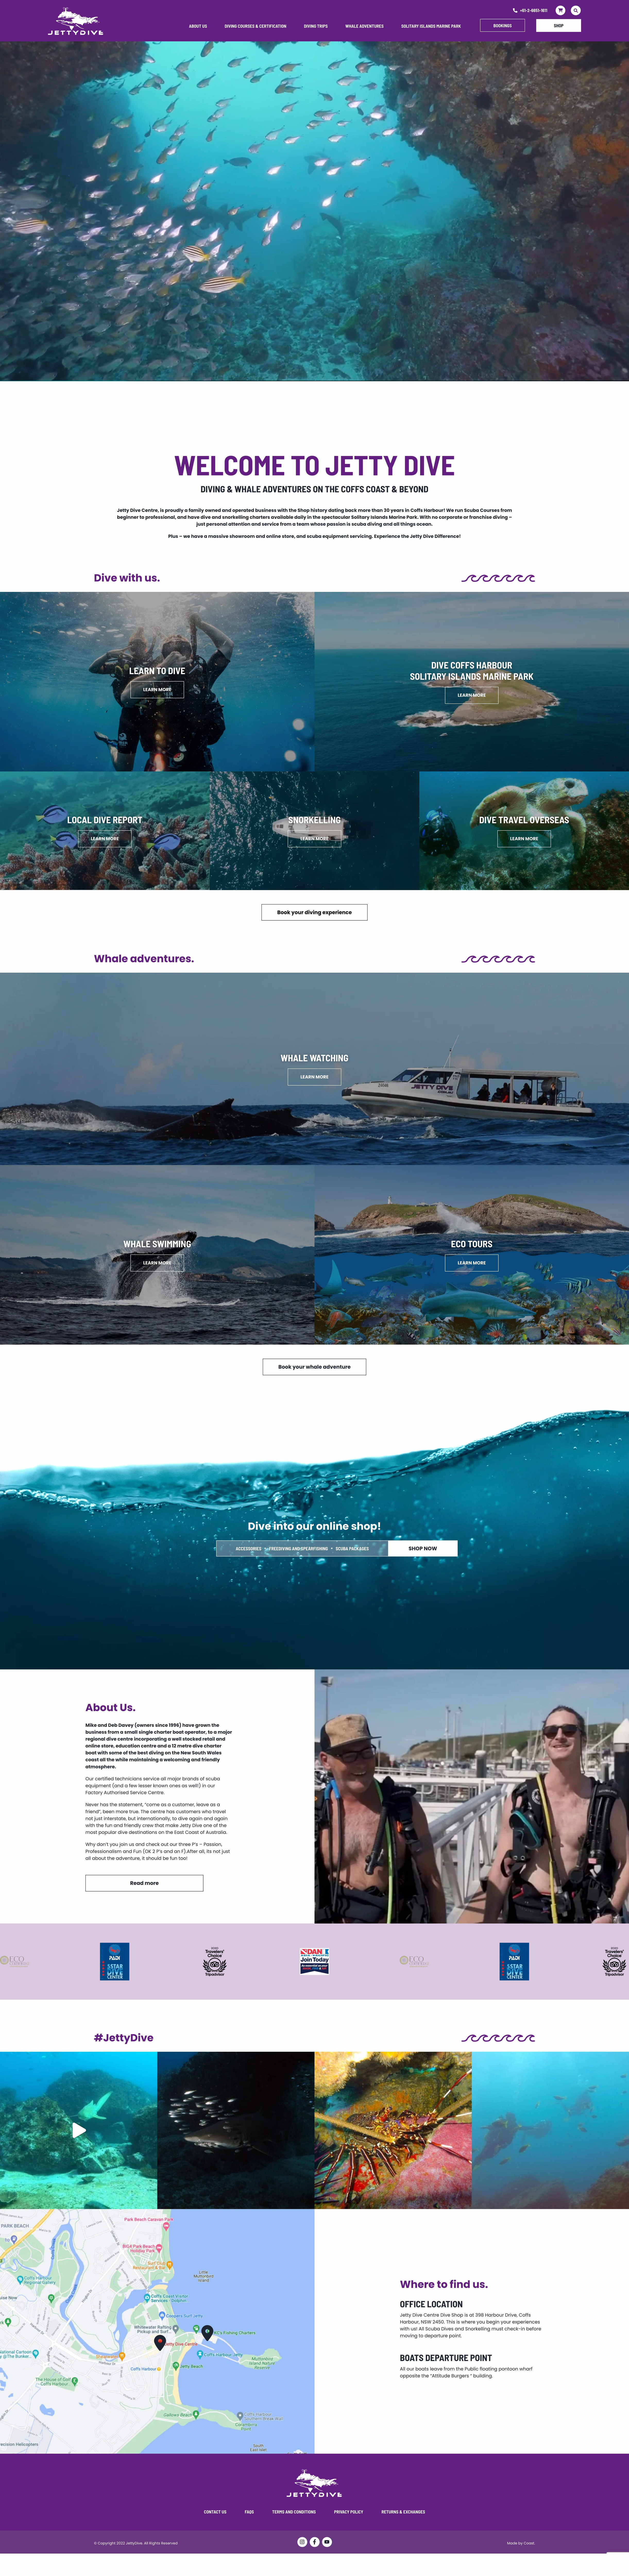 Website Design & Development for Mobile-first Website for Jetty Dive